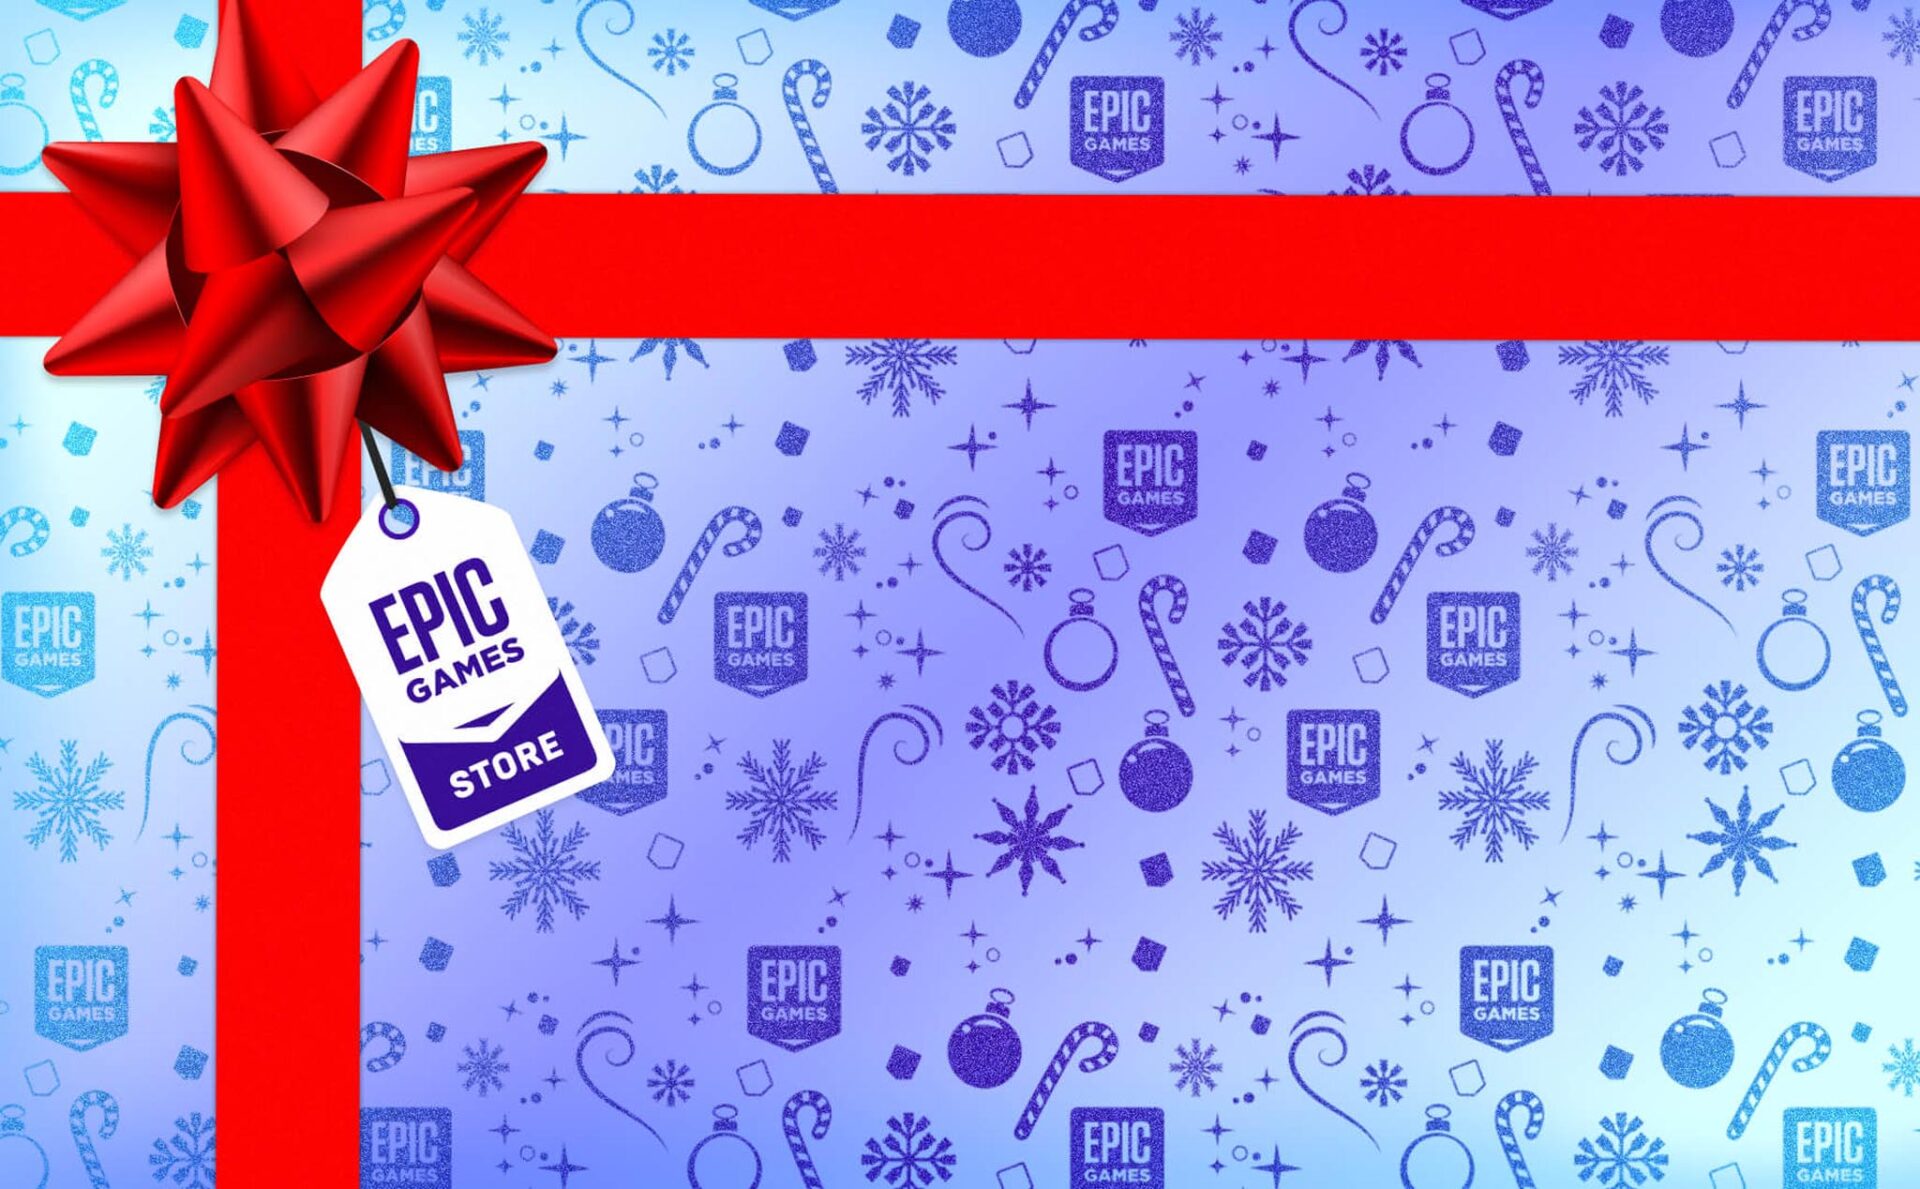 Epic officially launched Holiday Sale and Free Game